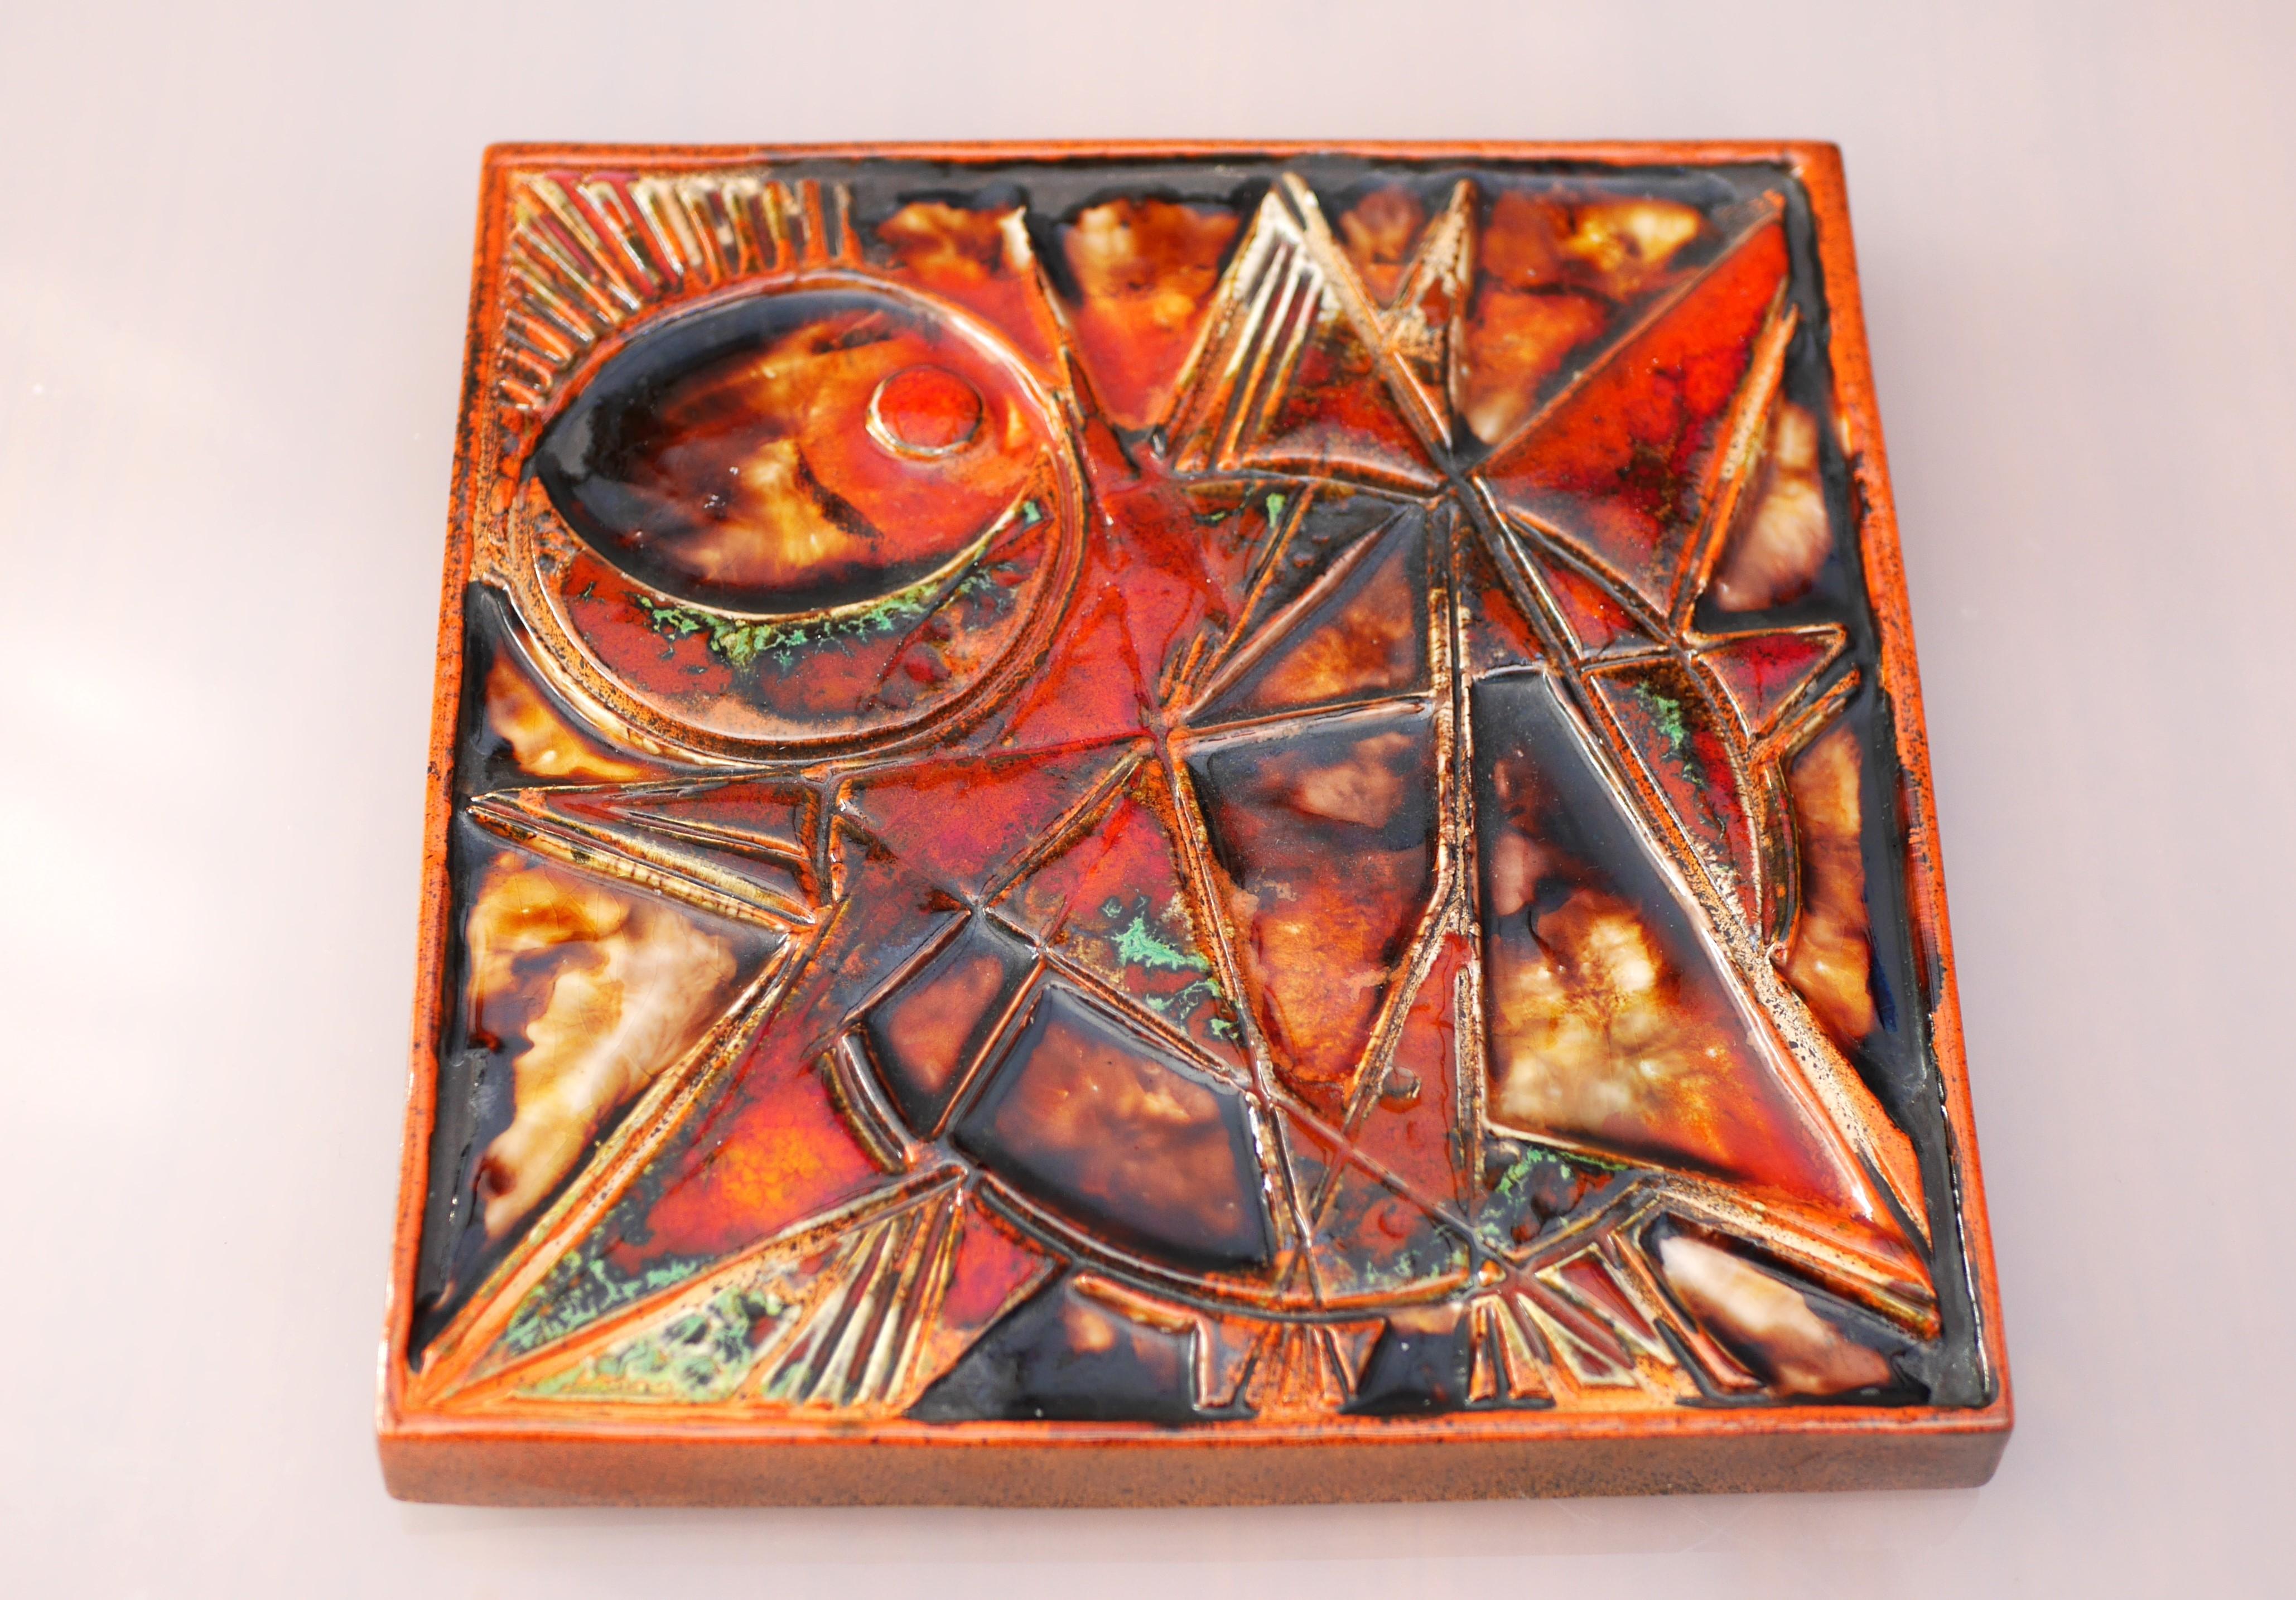 A unique and rather large ceramic wall plaque with an abstract pattern of a star and amazing colors from Tilgmans, Sweden. The amazing glazing has a rust orange or red base with some vibrant red, green and darker details. This is a piece of art,